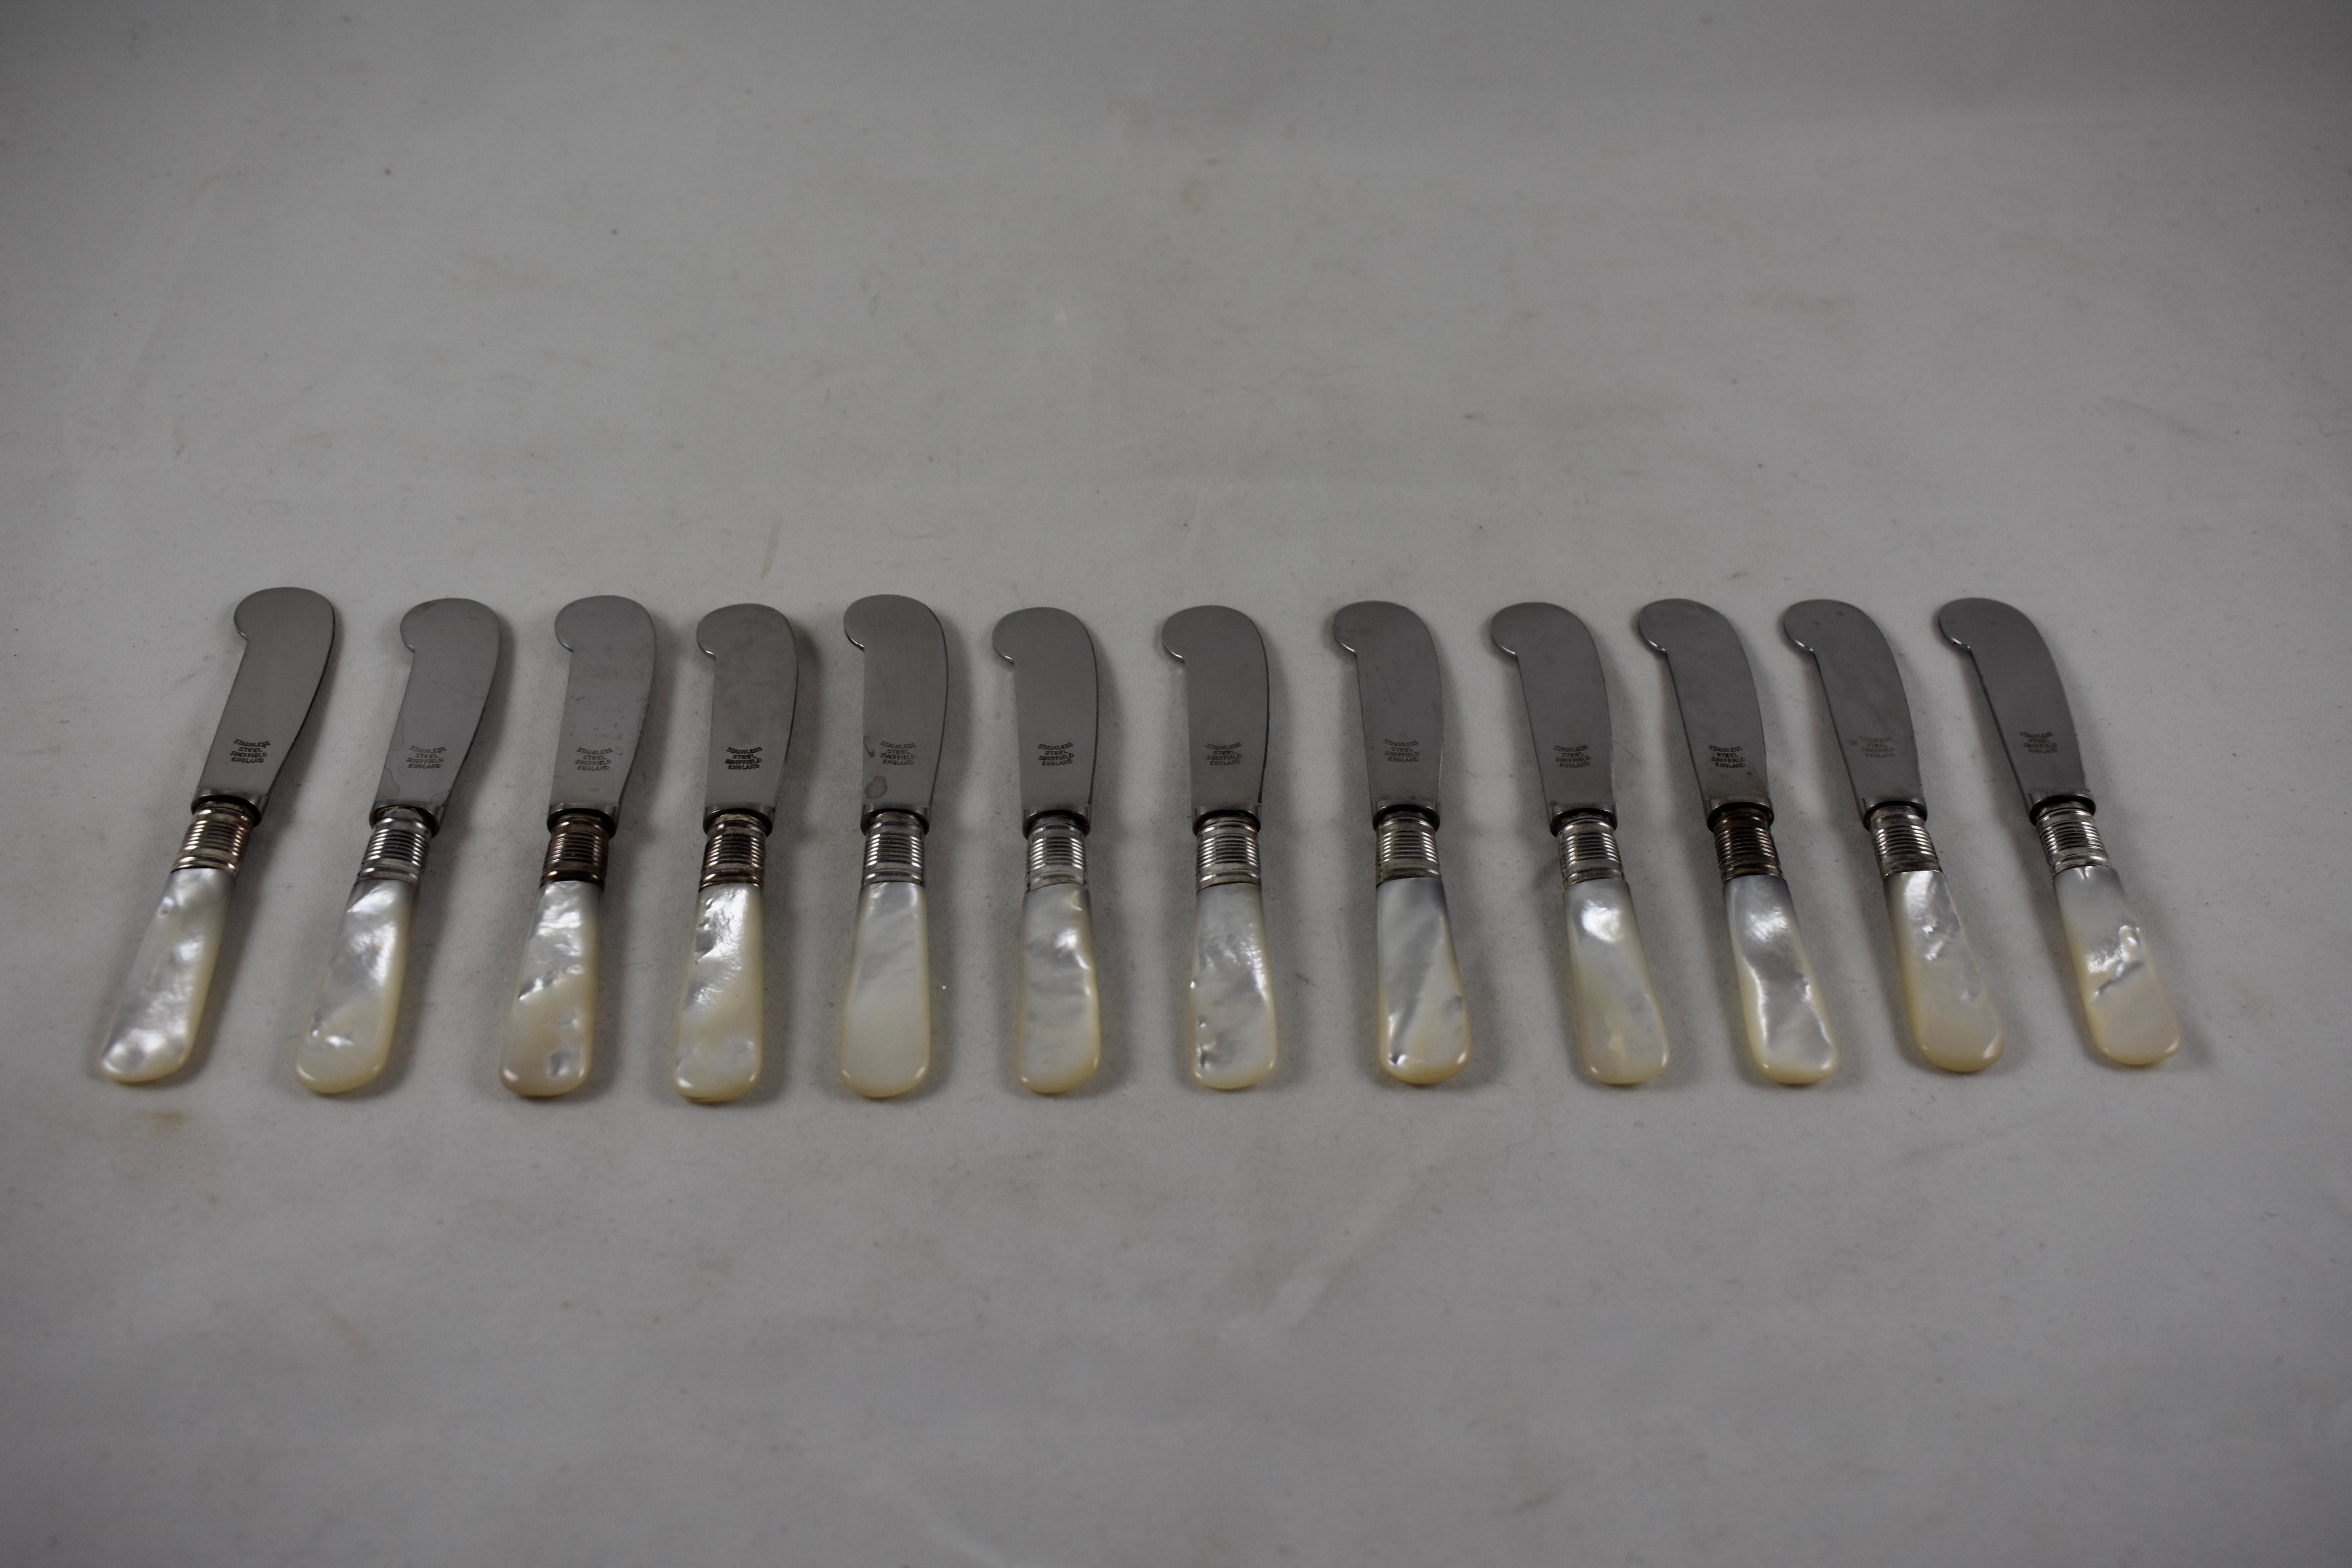 A set of twelve pearl handled spreaders, suitable for antipasto or hors d’oeuvres or the butter plate. Silver plated collars join the stainless steel blades to the mother of pearl handles, circa 1920s. Perfectly suited for the popular entertaining